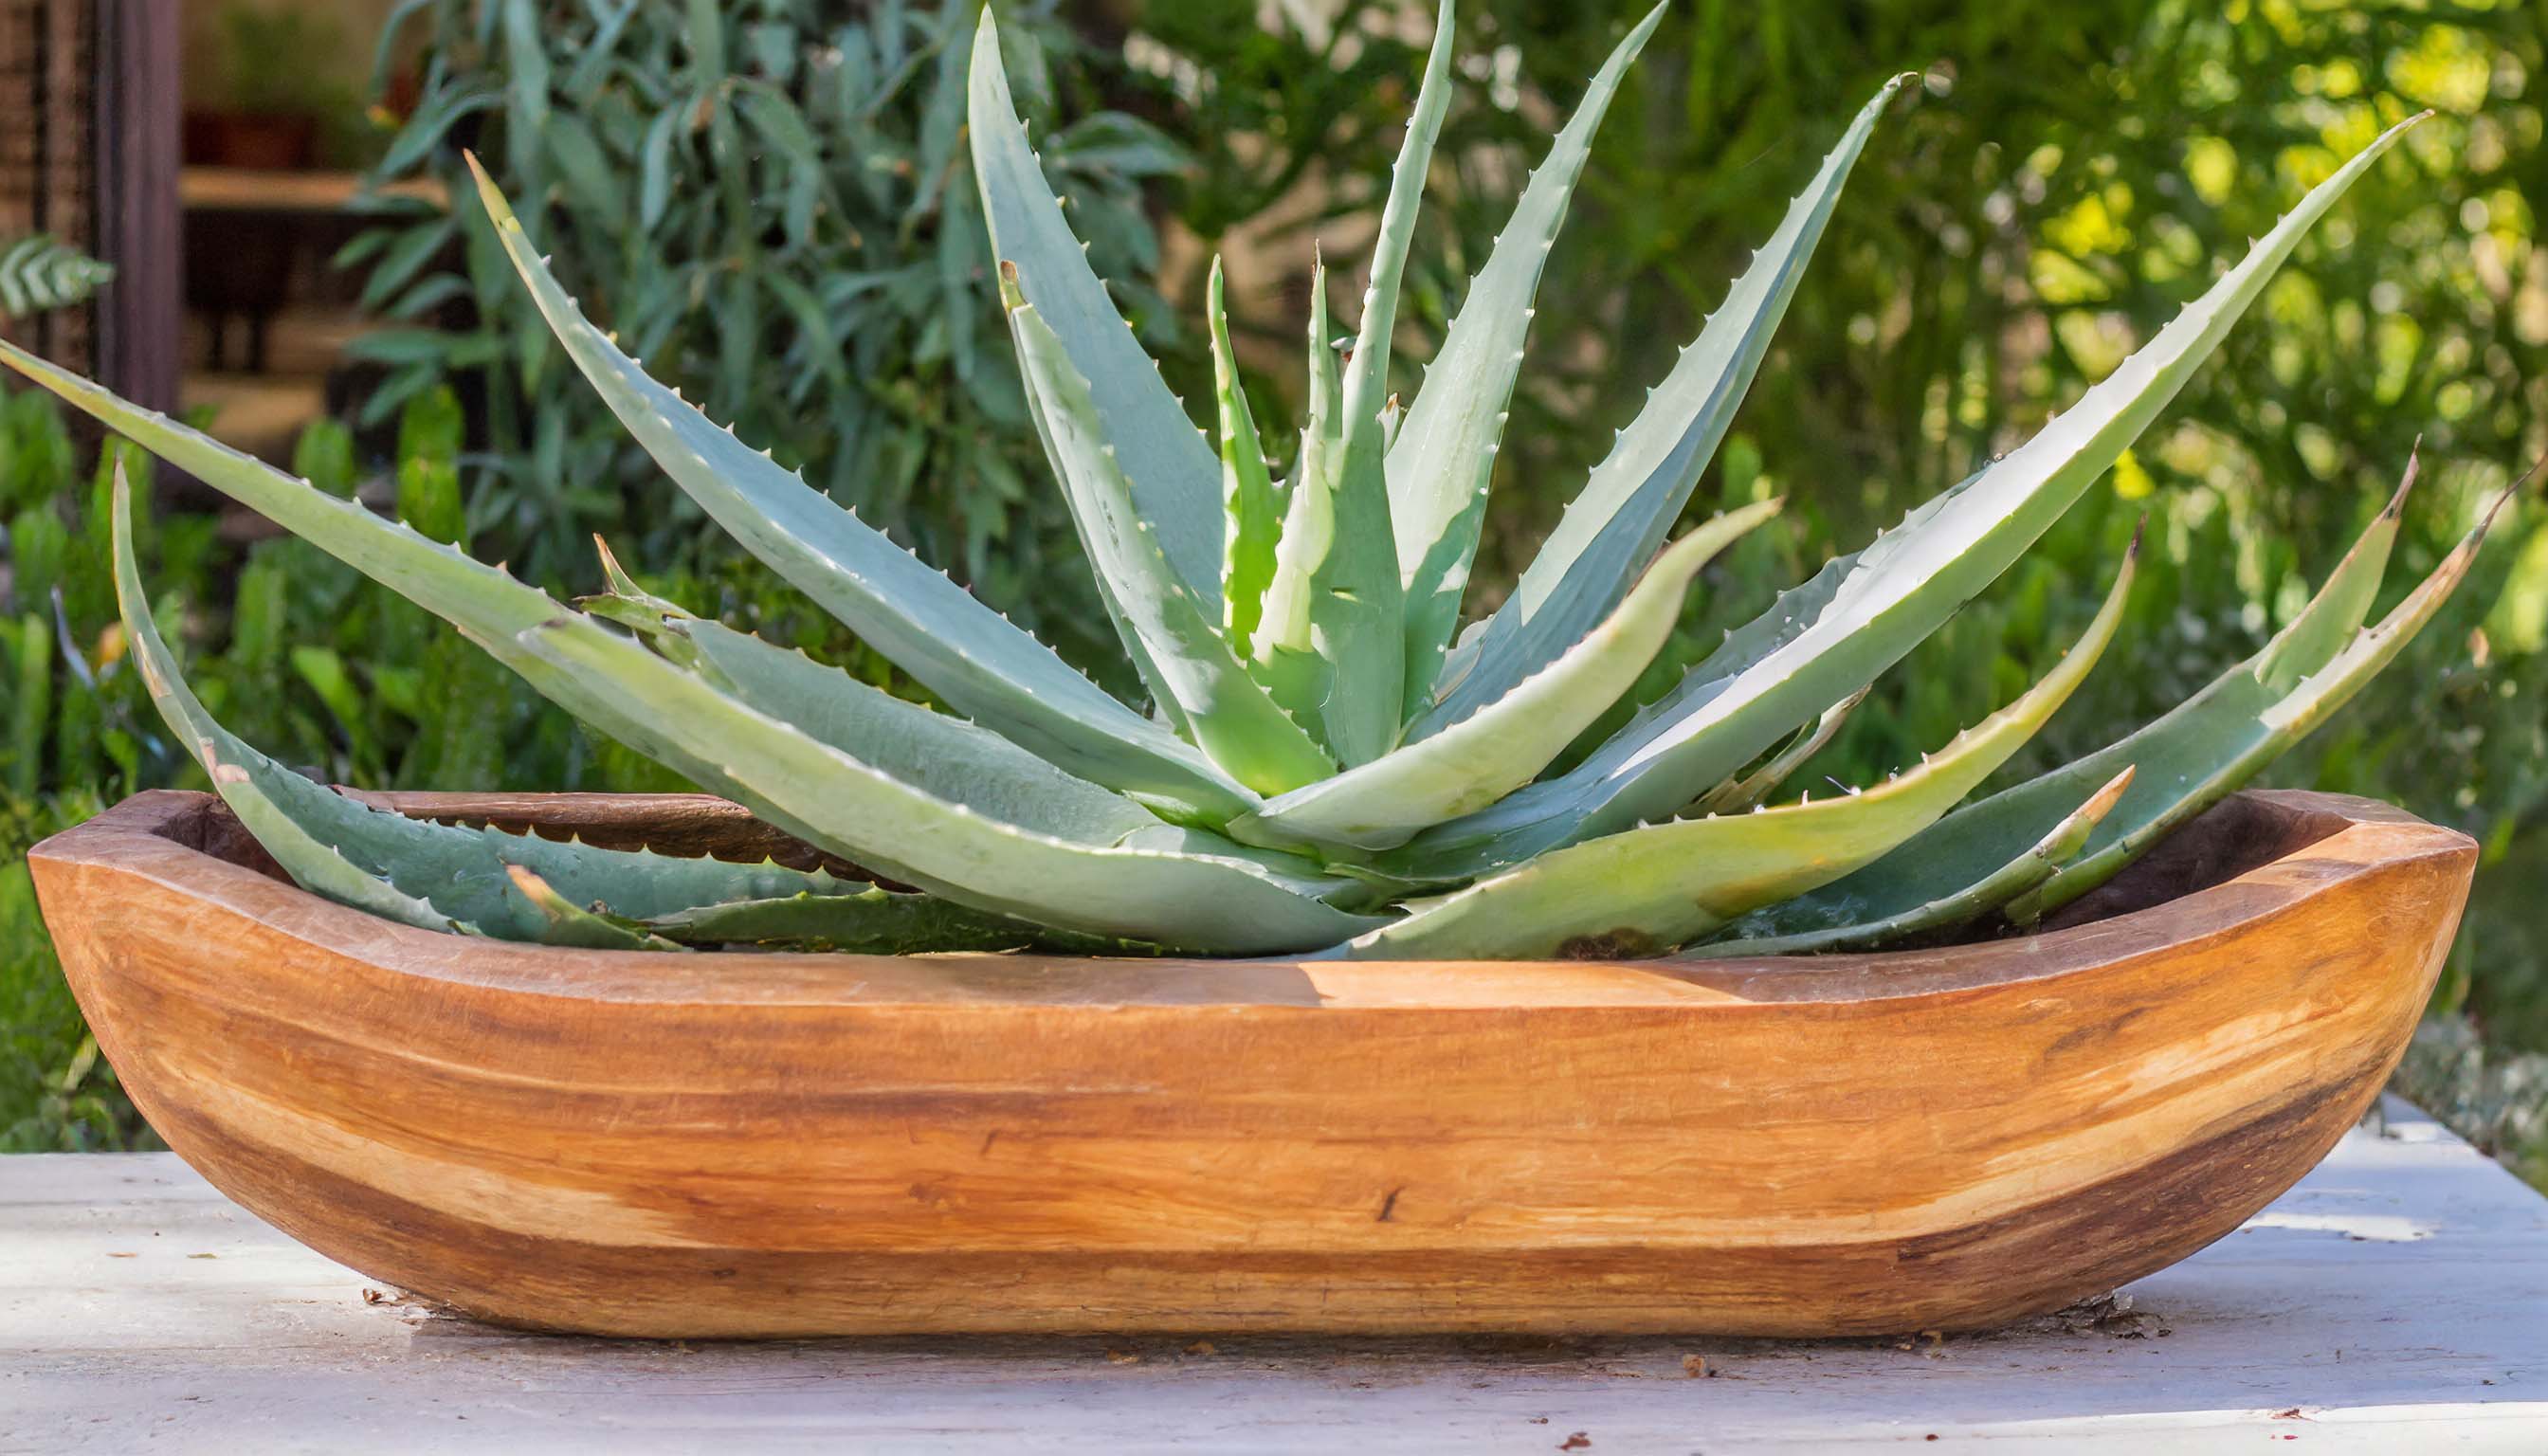 Wooden dough bowl trough filled with single aloe vera plant.